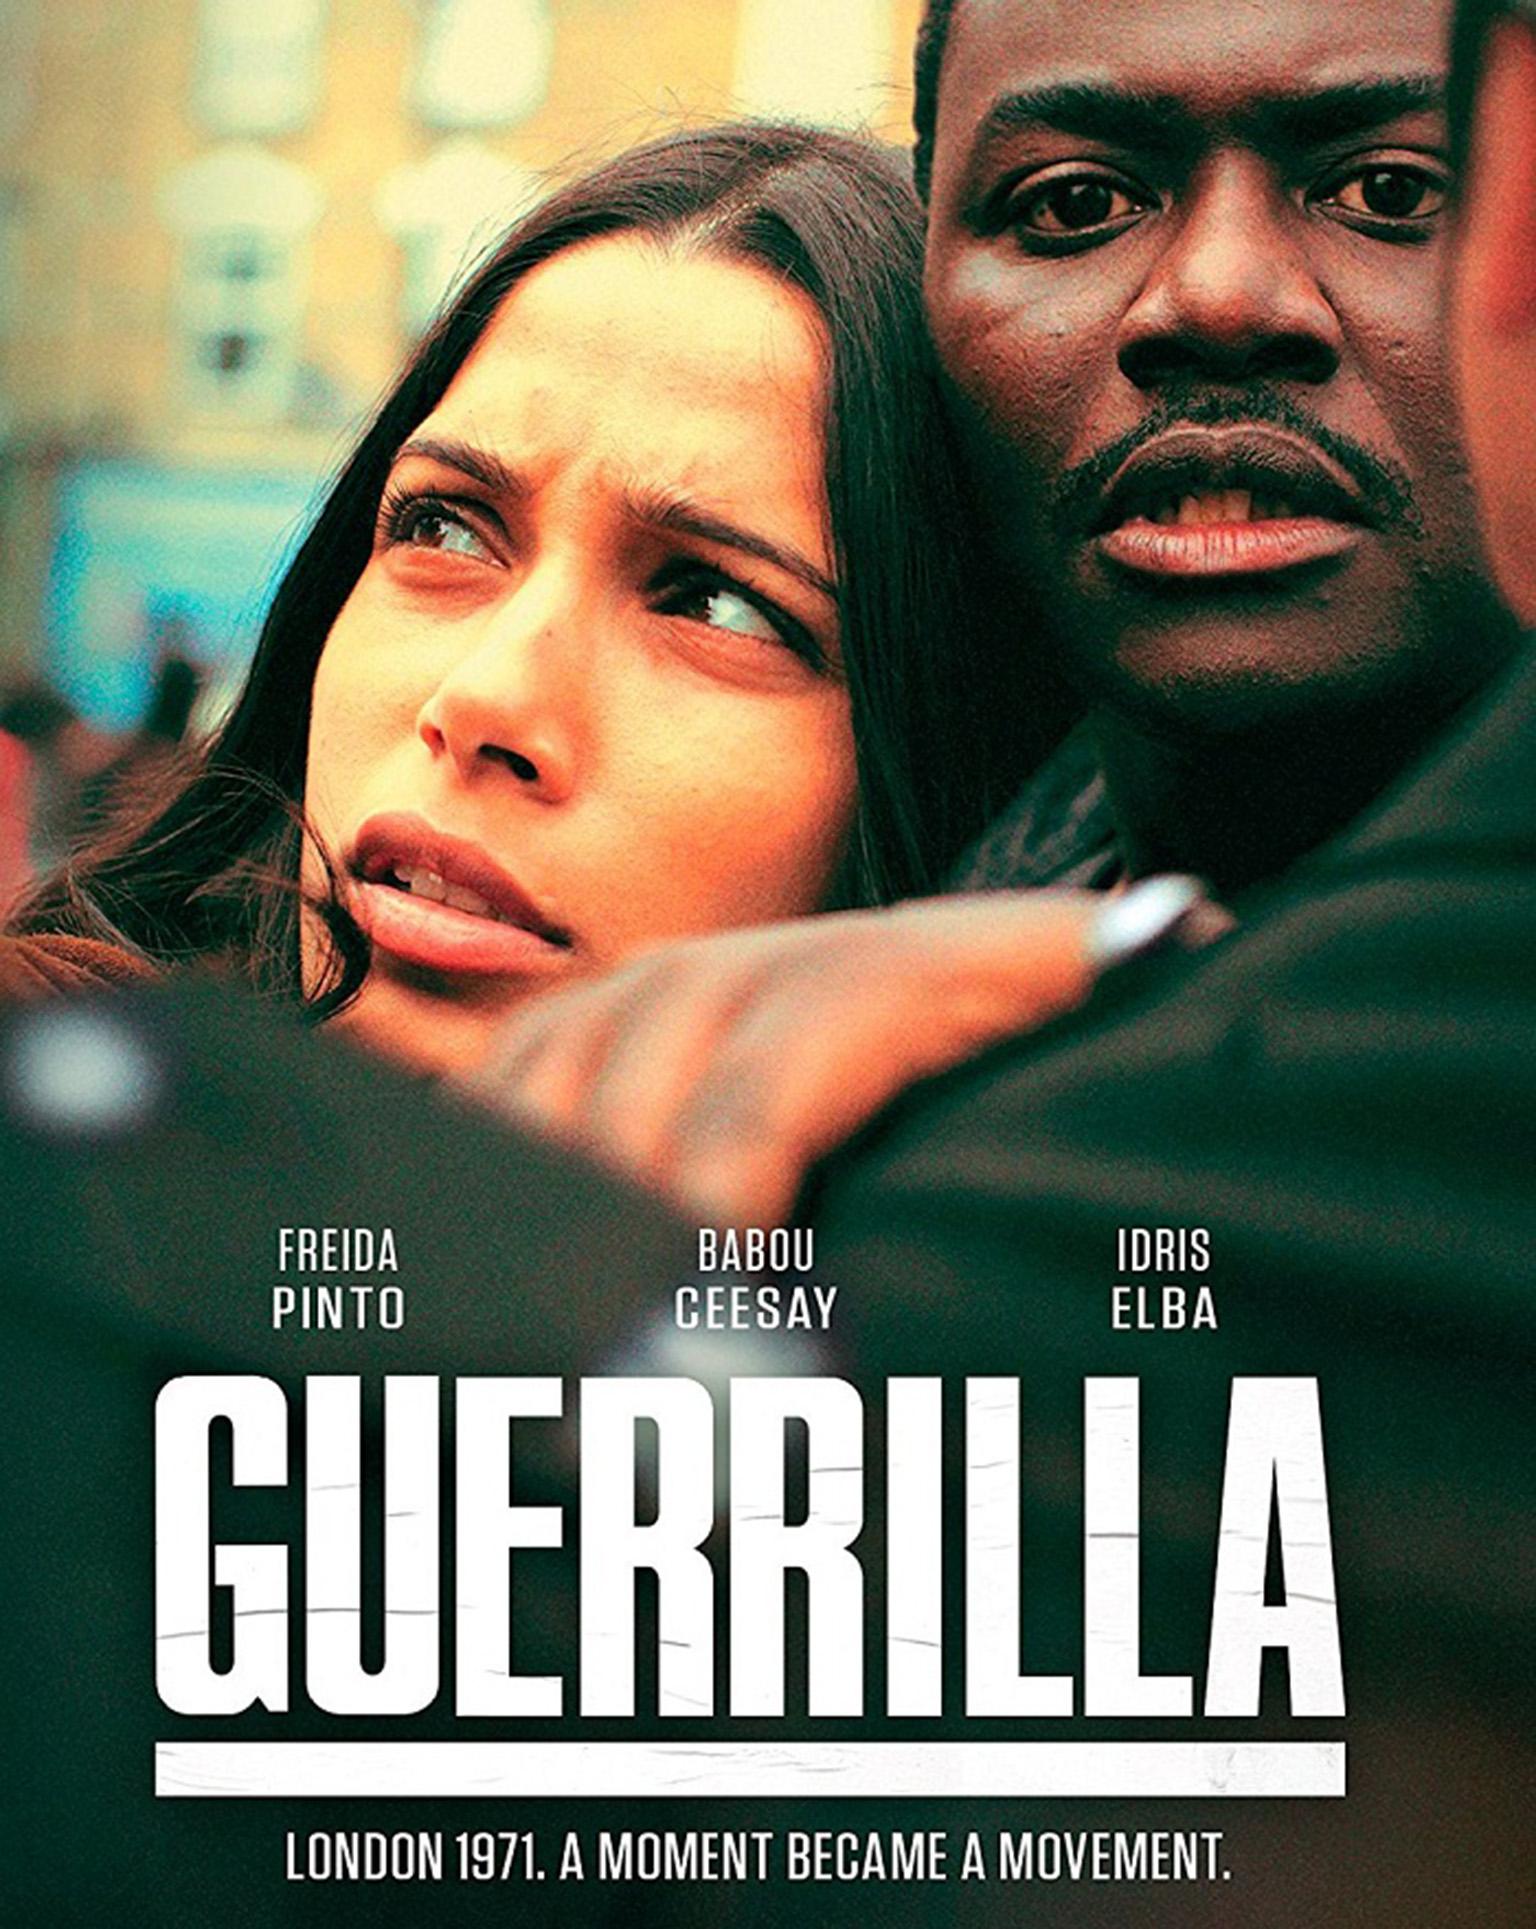 Poster for ‘Guerrilla’, the 2017 miniseries about a fictional British black power group